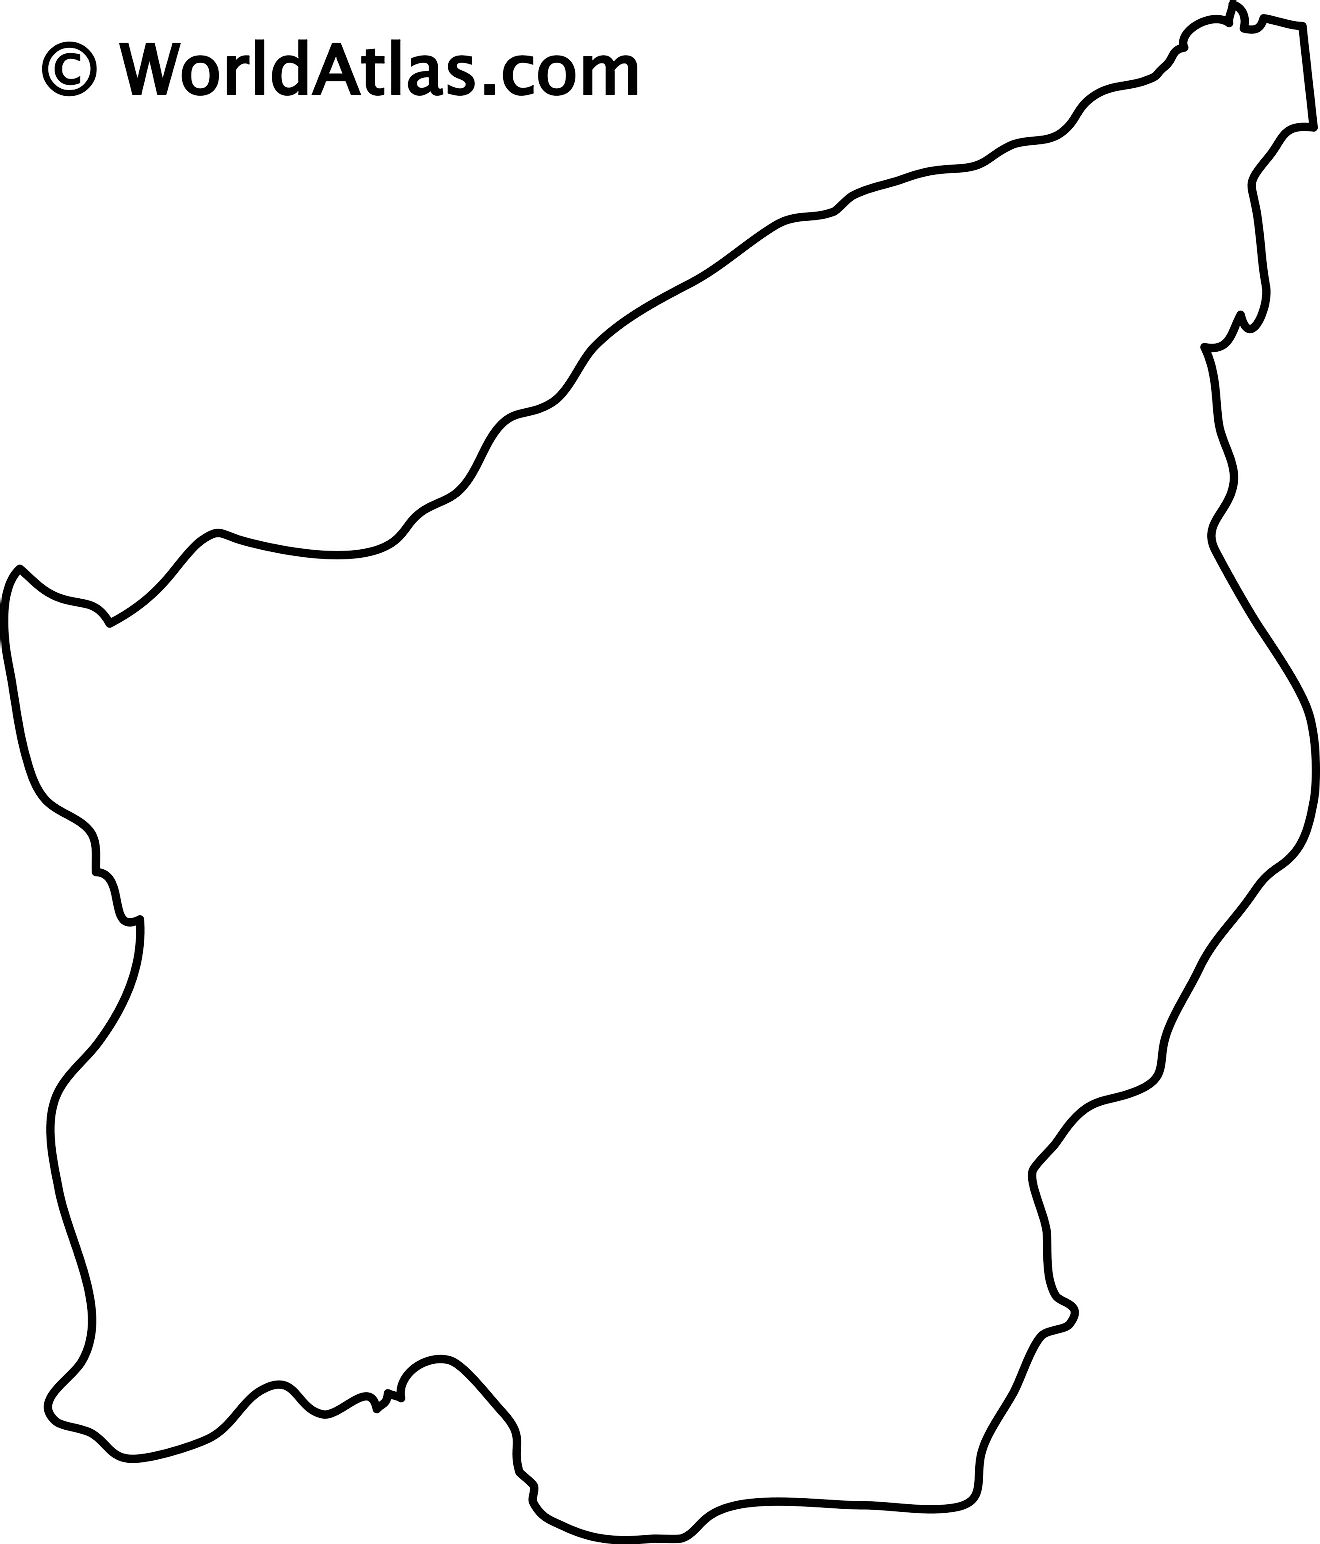 Blank Outline Map of San Marino